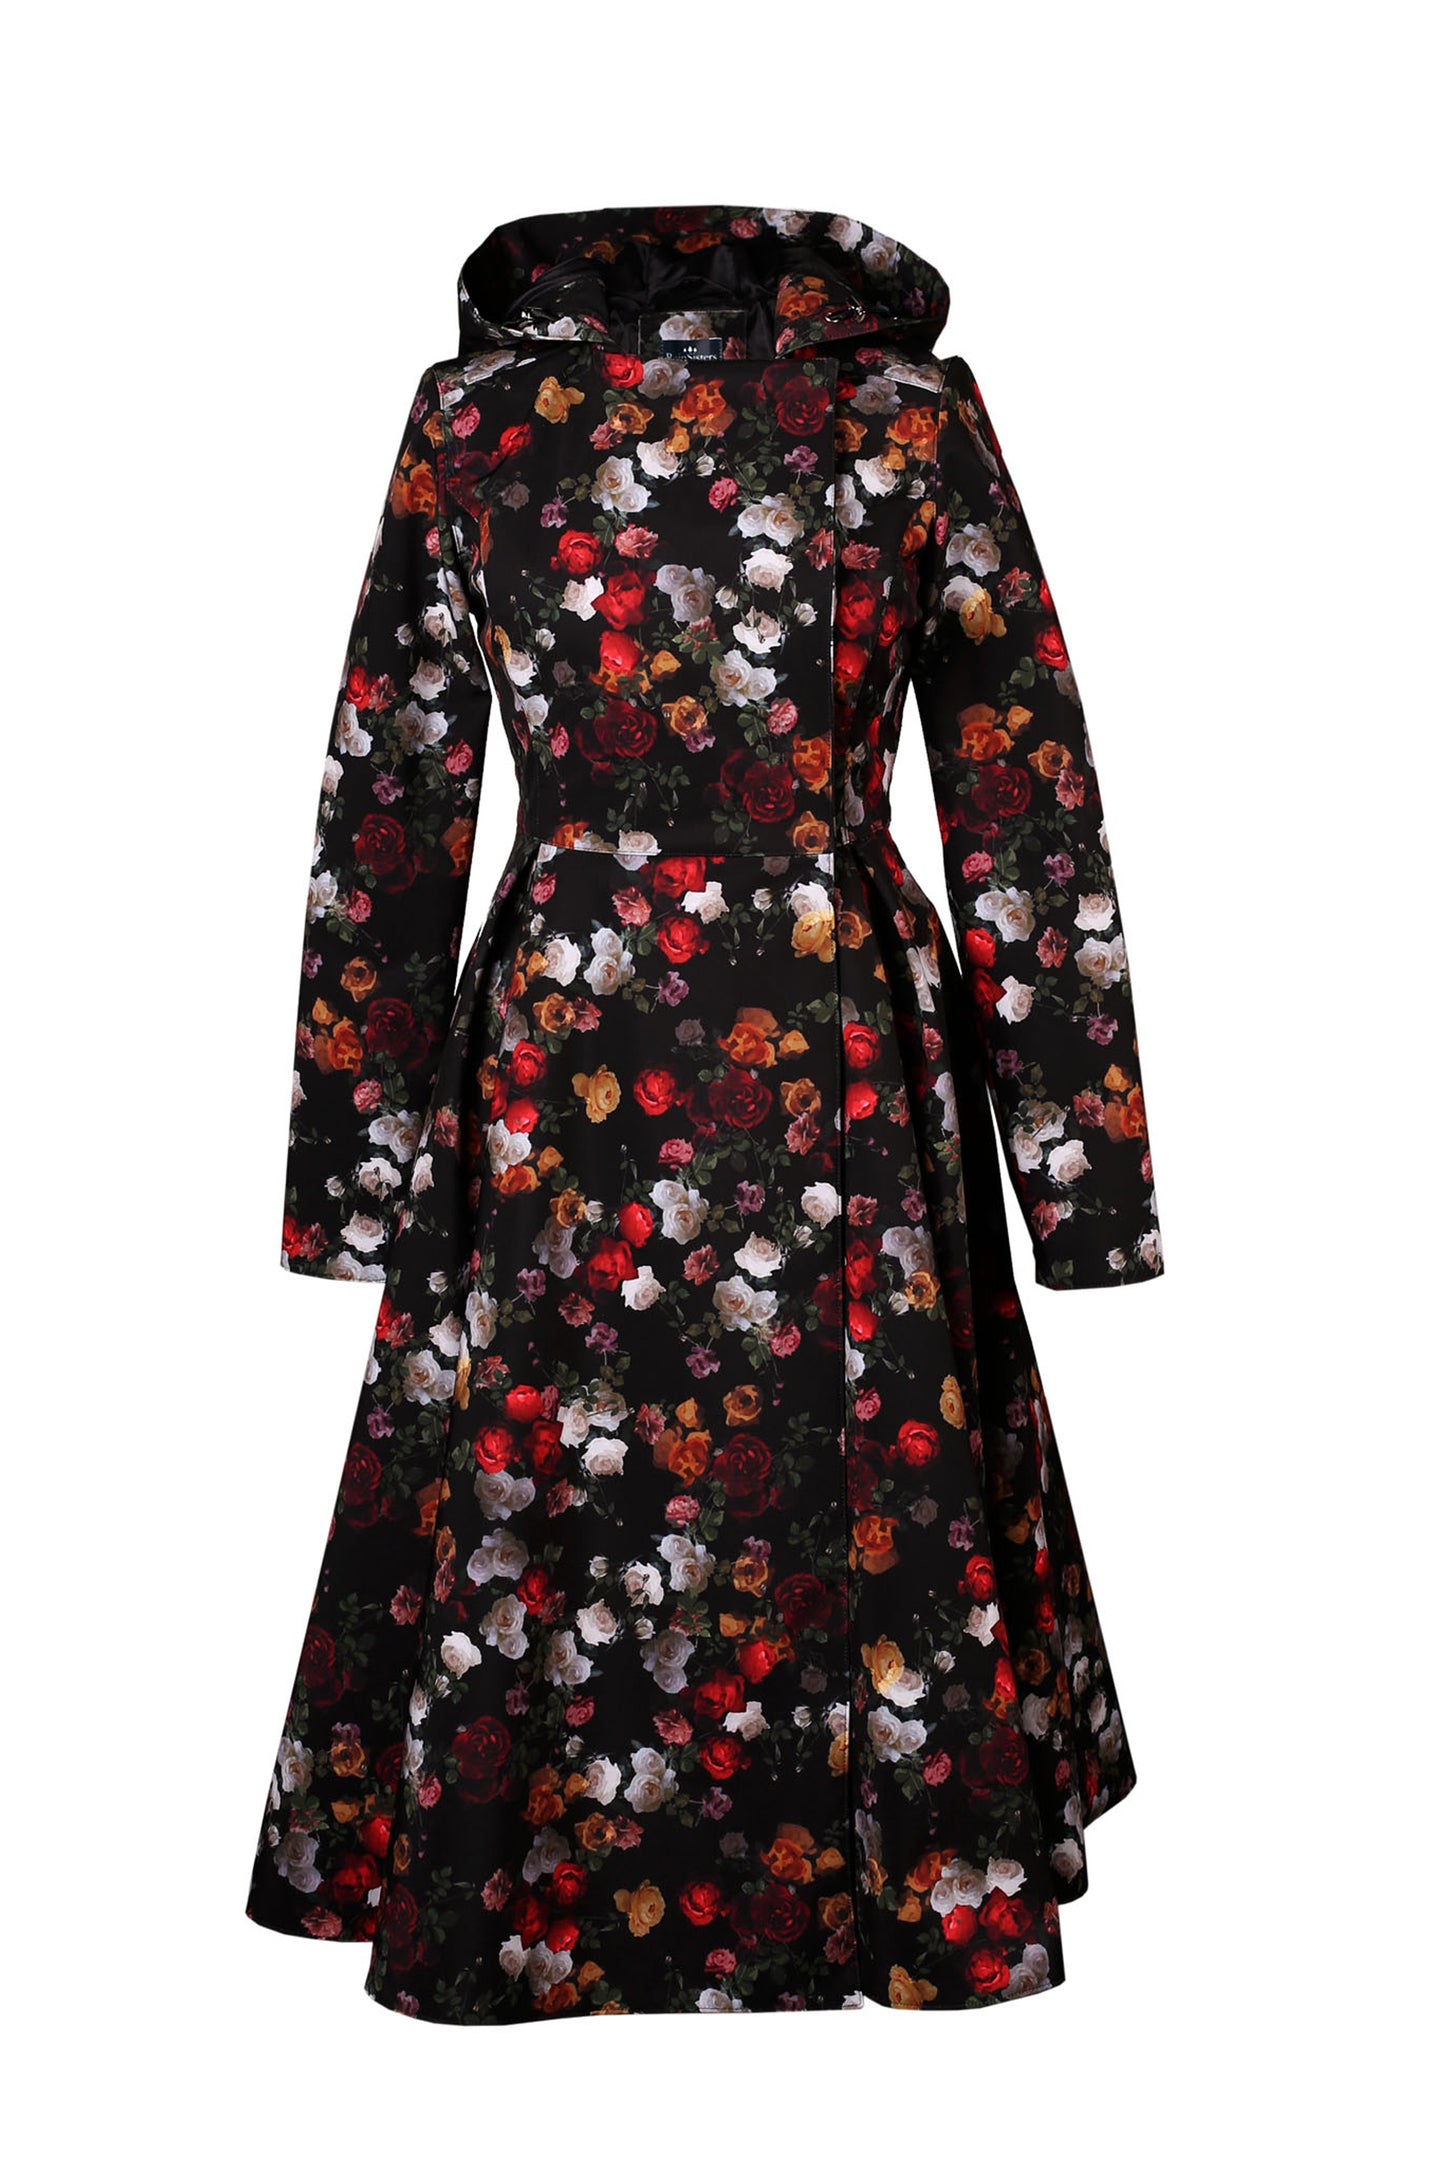 Colorful Women's Long Double Breasted Peacoat with Hood and Rose Flower Print